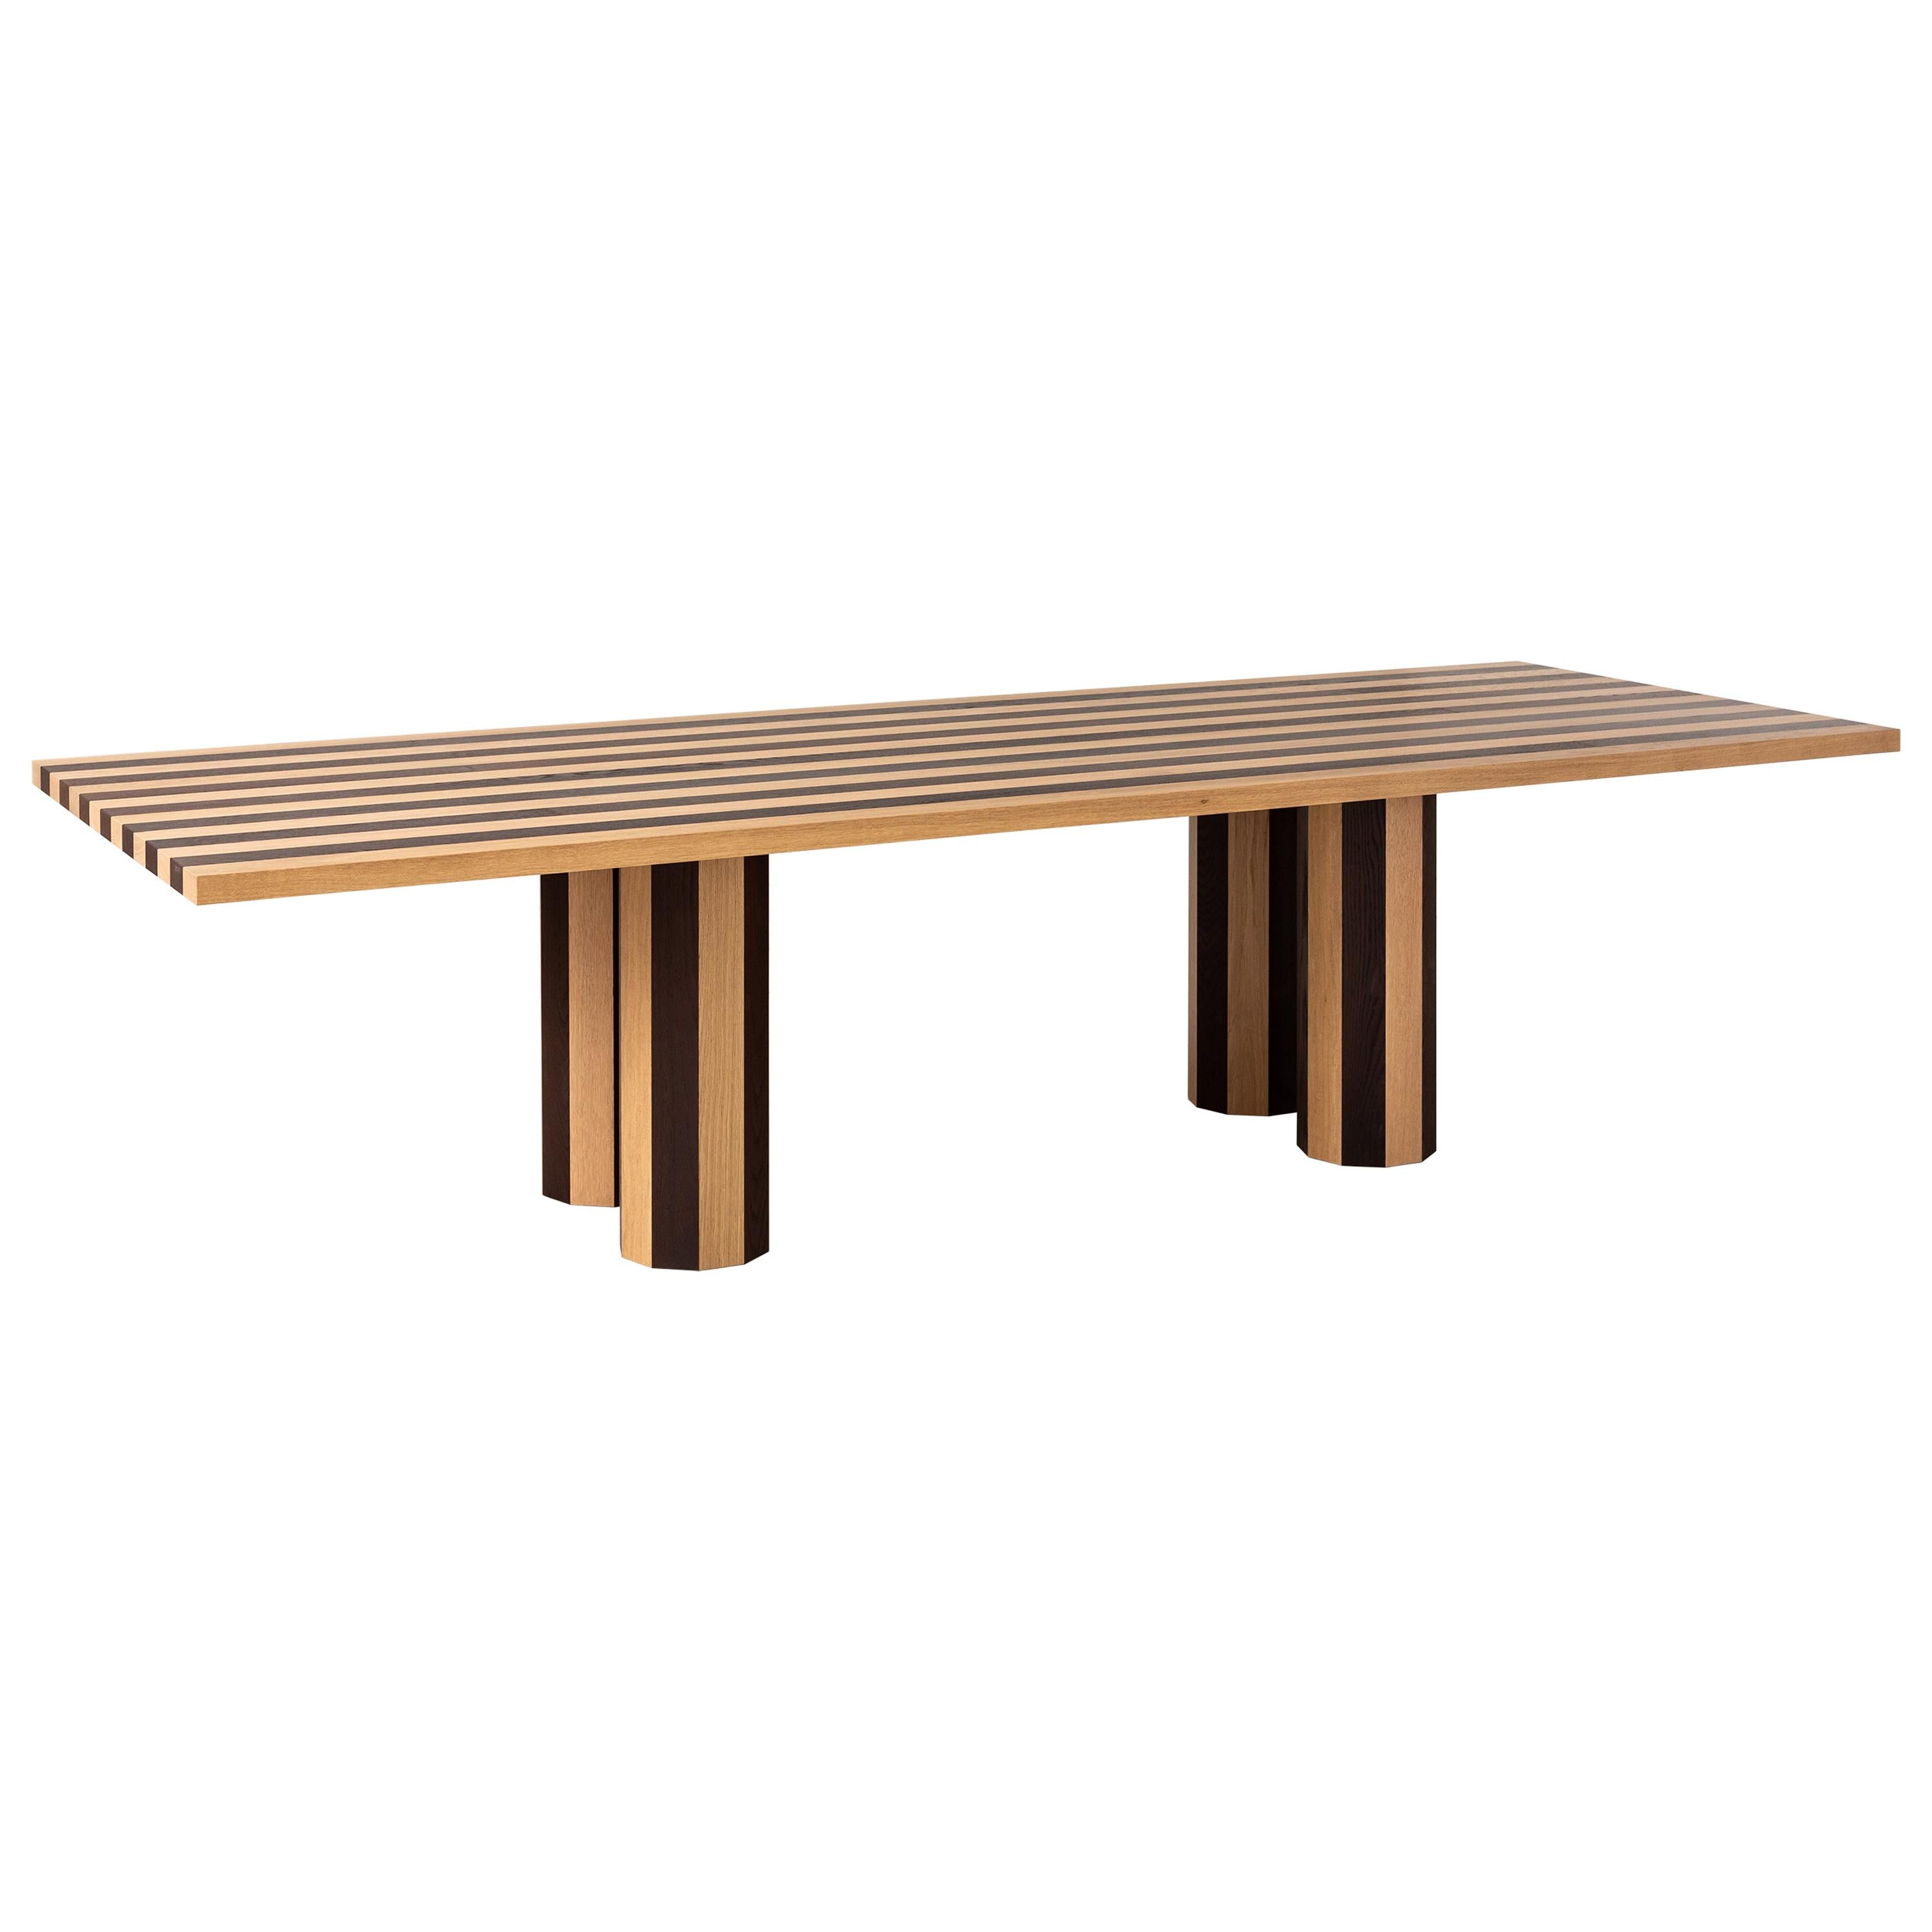 Rectangular Cooperage Dining Table in Striped Oak by Fort Standard, in Stock